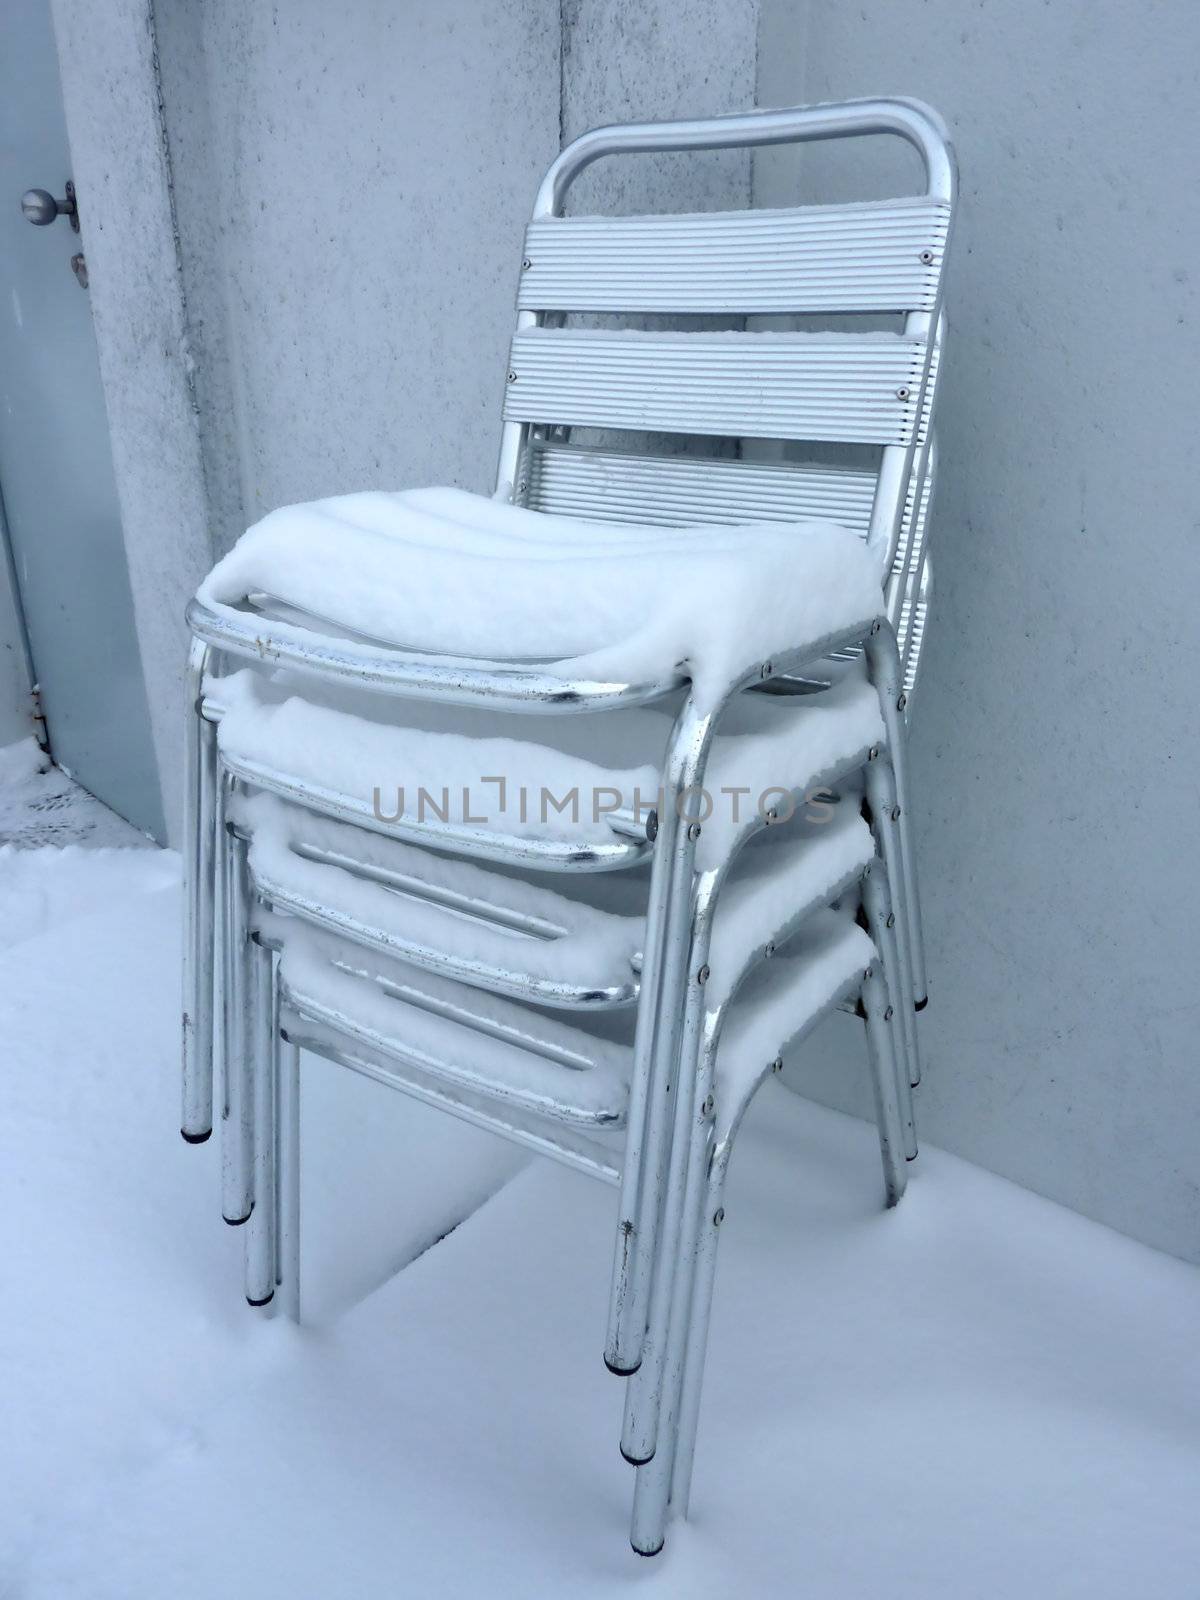 Pile of chairs covered by snow by Elenaphotos21